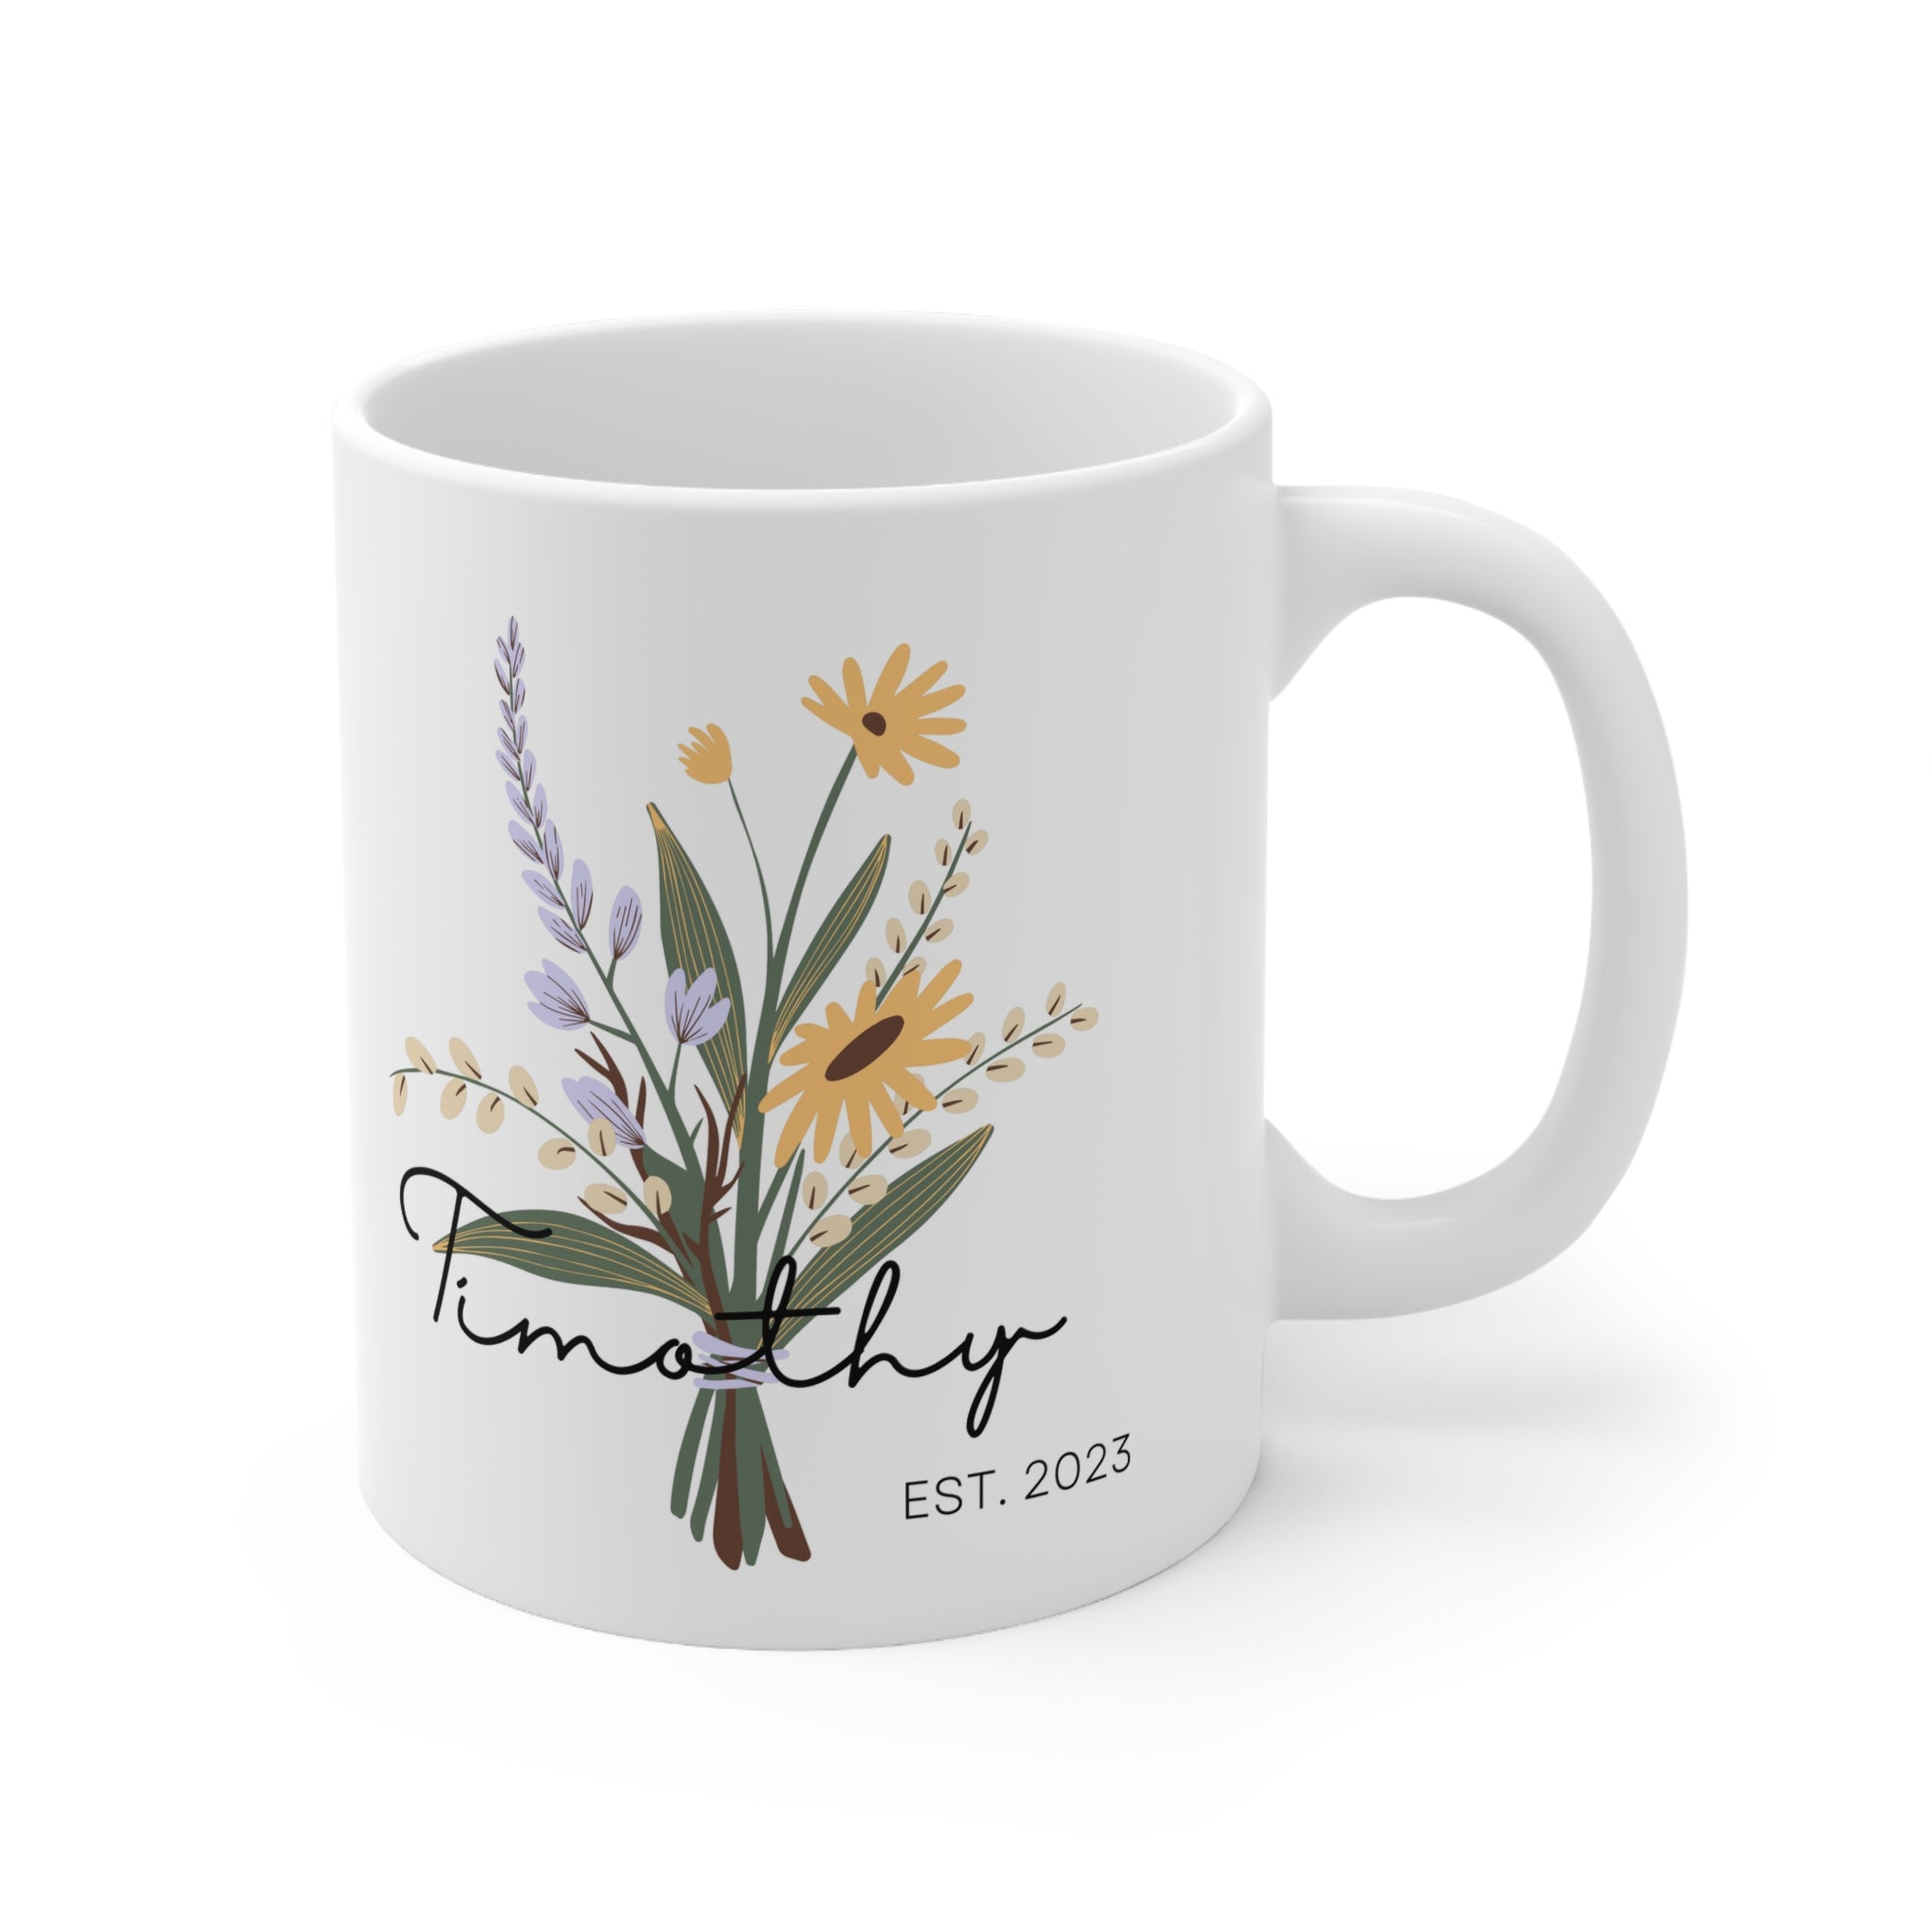 Great Gift for Work or for Coffee Breaks! Cherish Memories with Our Personalized Name and EST Date Floral Ceramic Mug 11oz - A Custom Keepsake to Sip and Smile